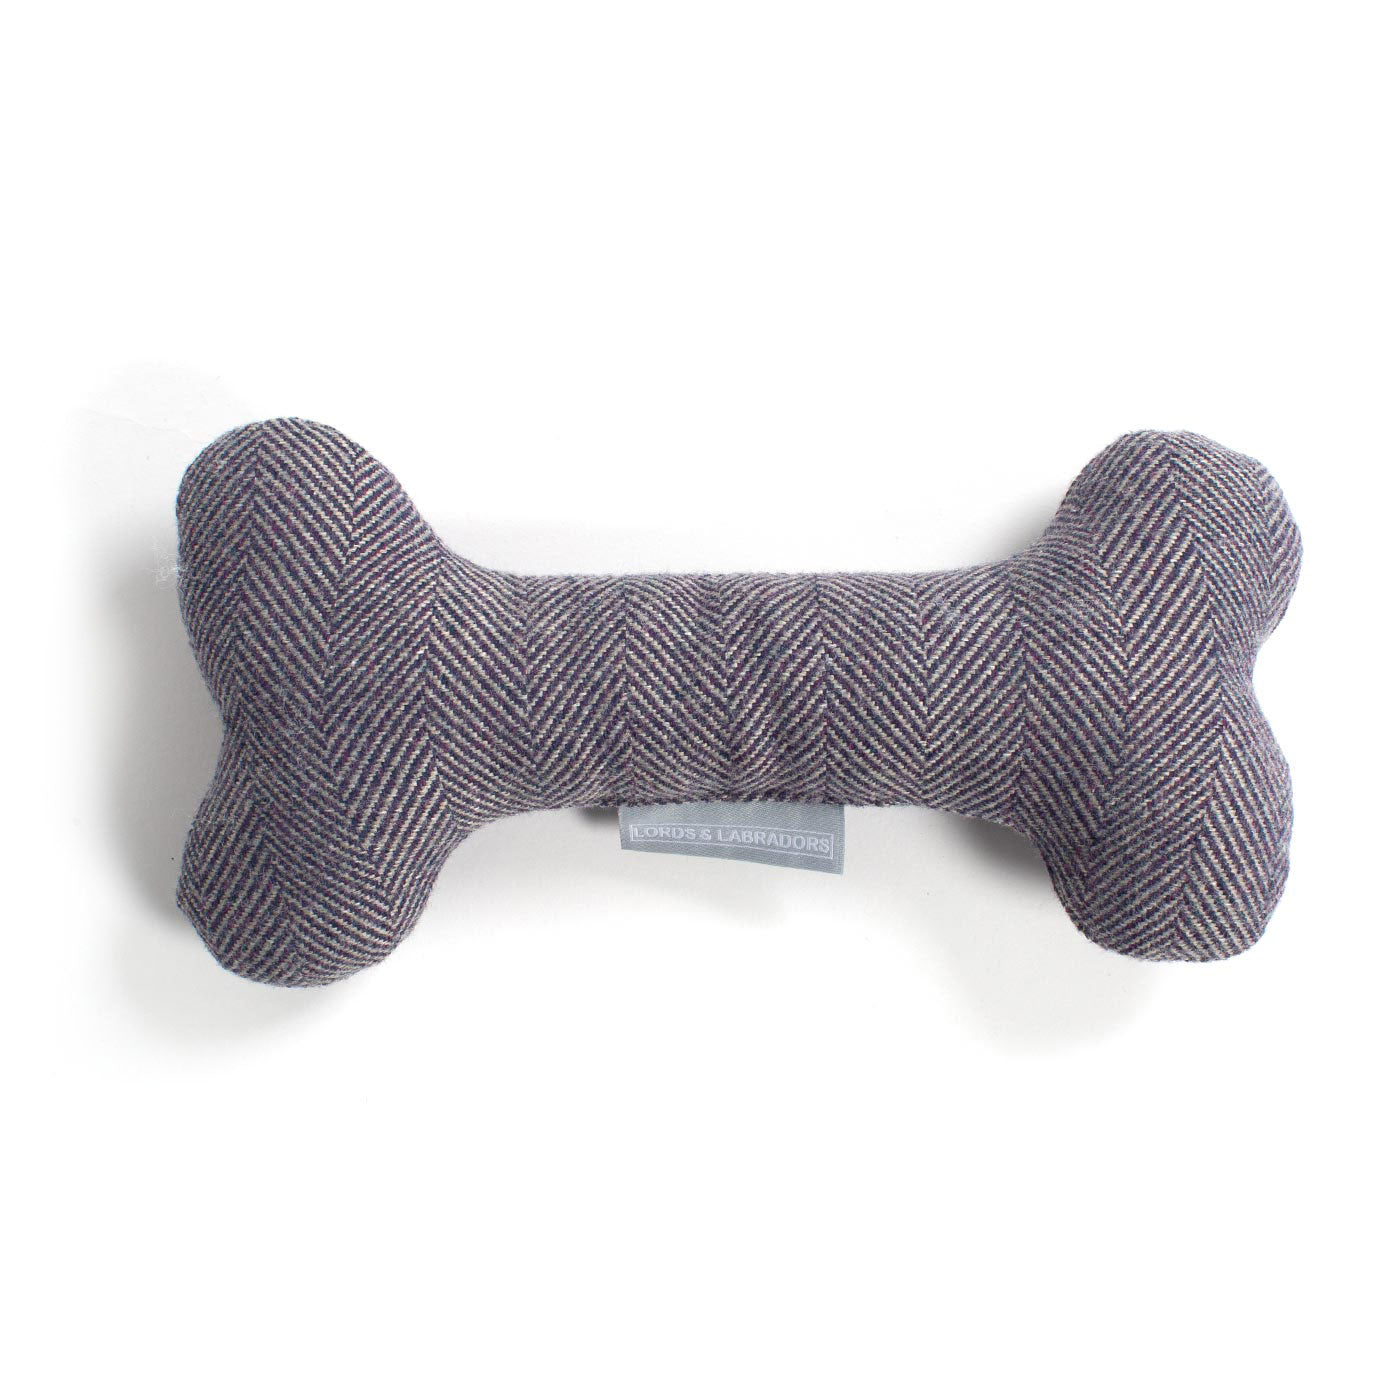 Present The Perfect Pet Playtime With Our Luxury Dog Bone Toy, In Stunning Oxford Herringbone Tweed! Available To Personalise Now at Lords & Labradors    